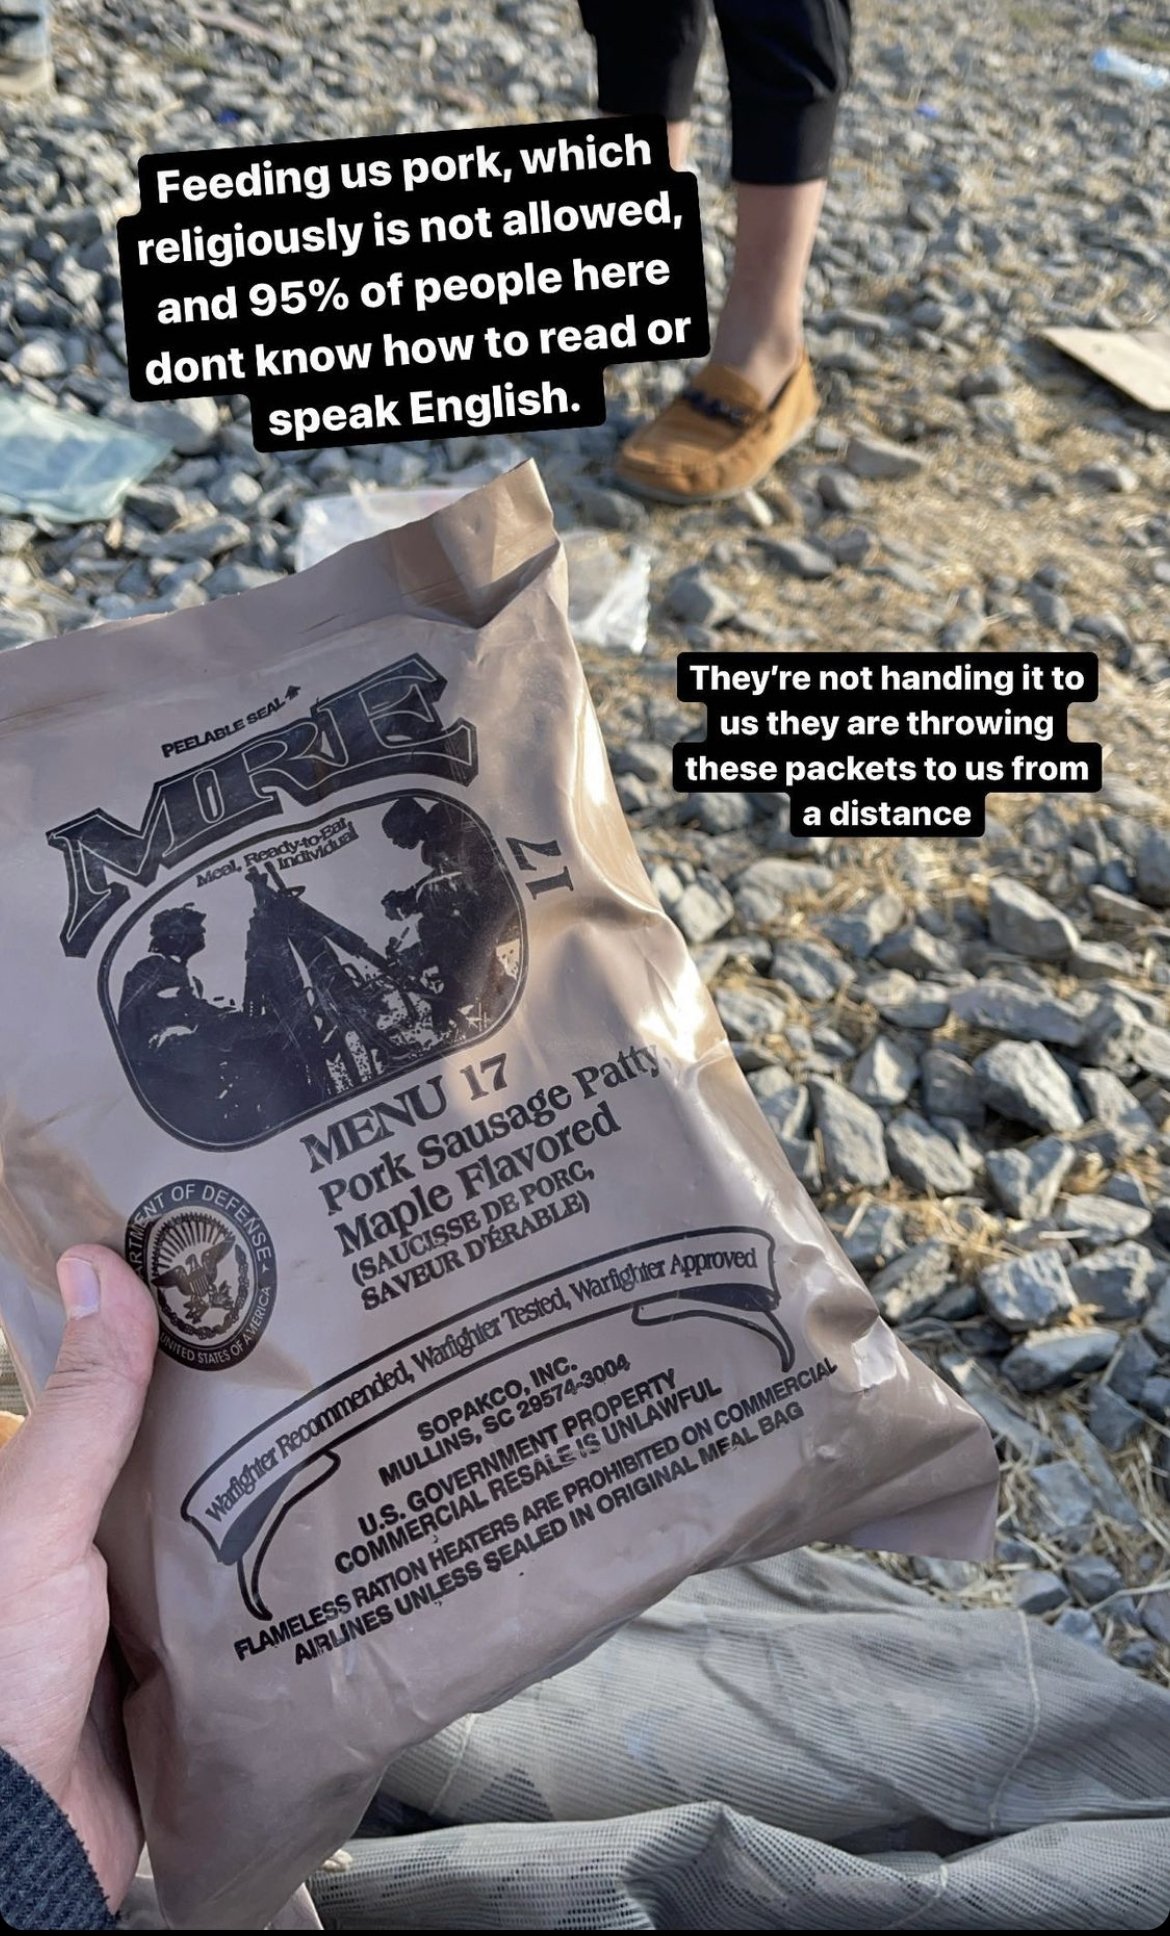 Instagram screenshot showing pork distributed by US soldiers at Kabul airport.